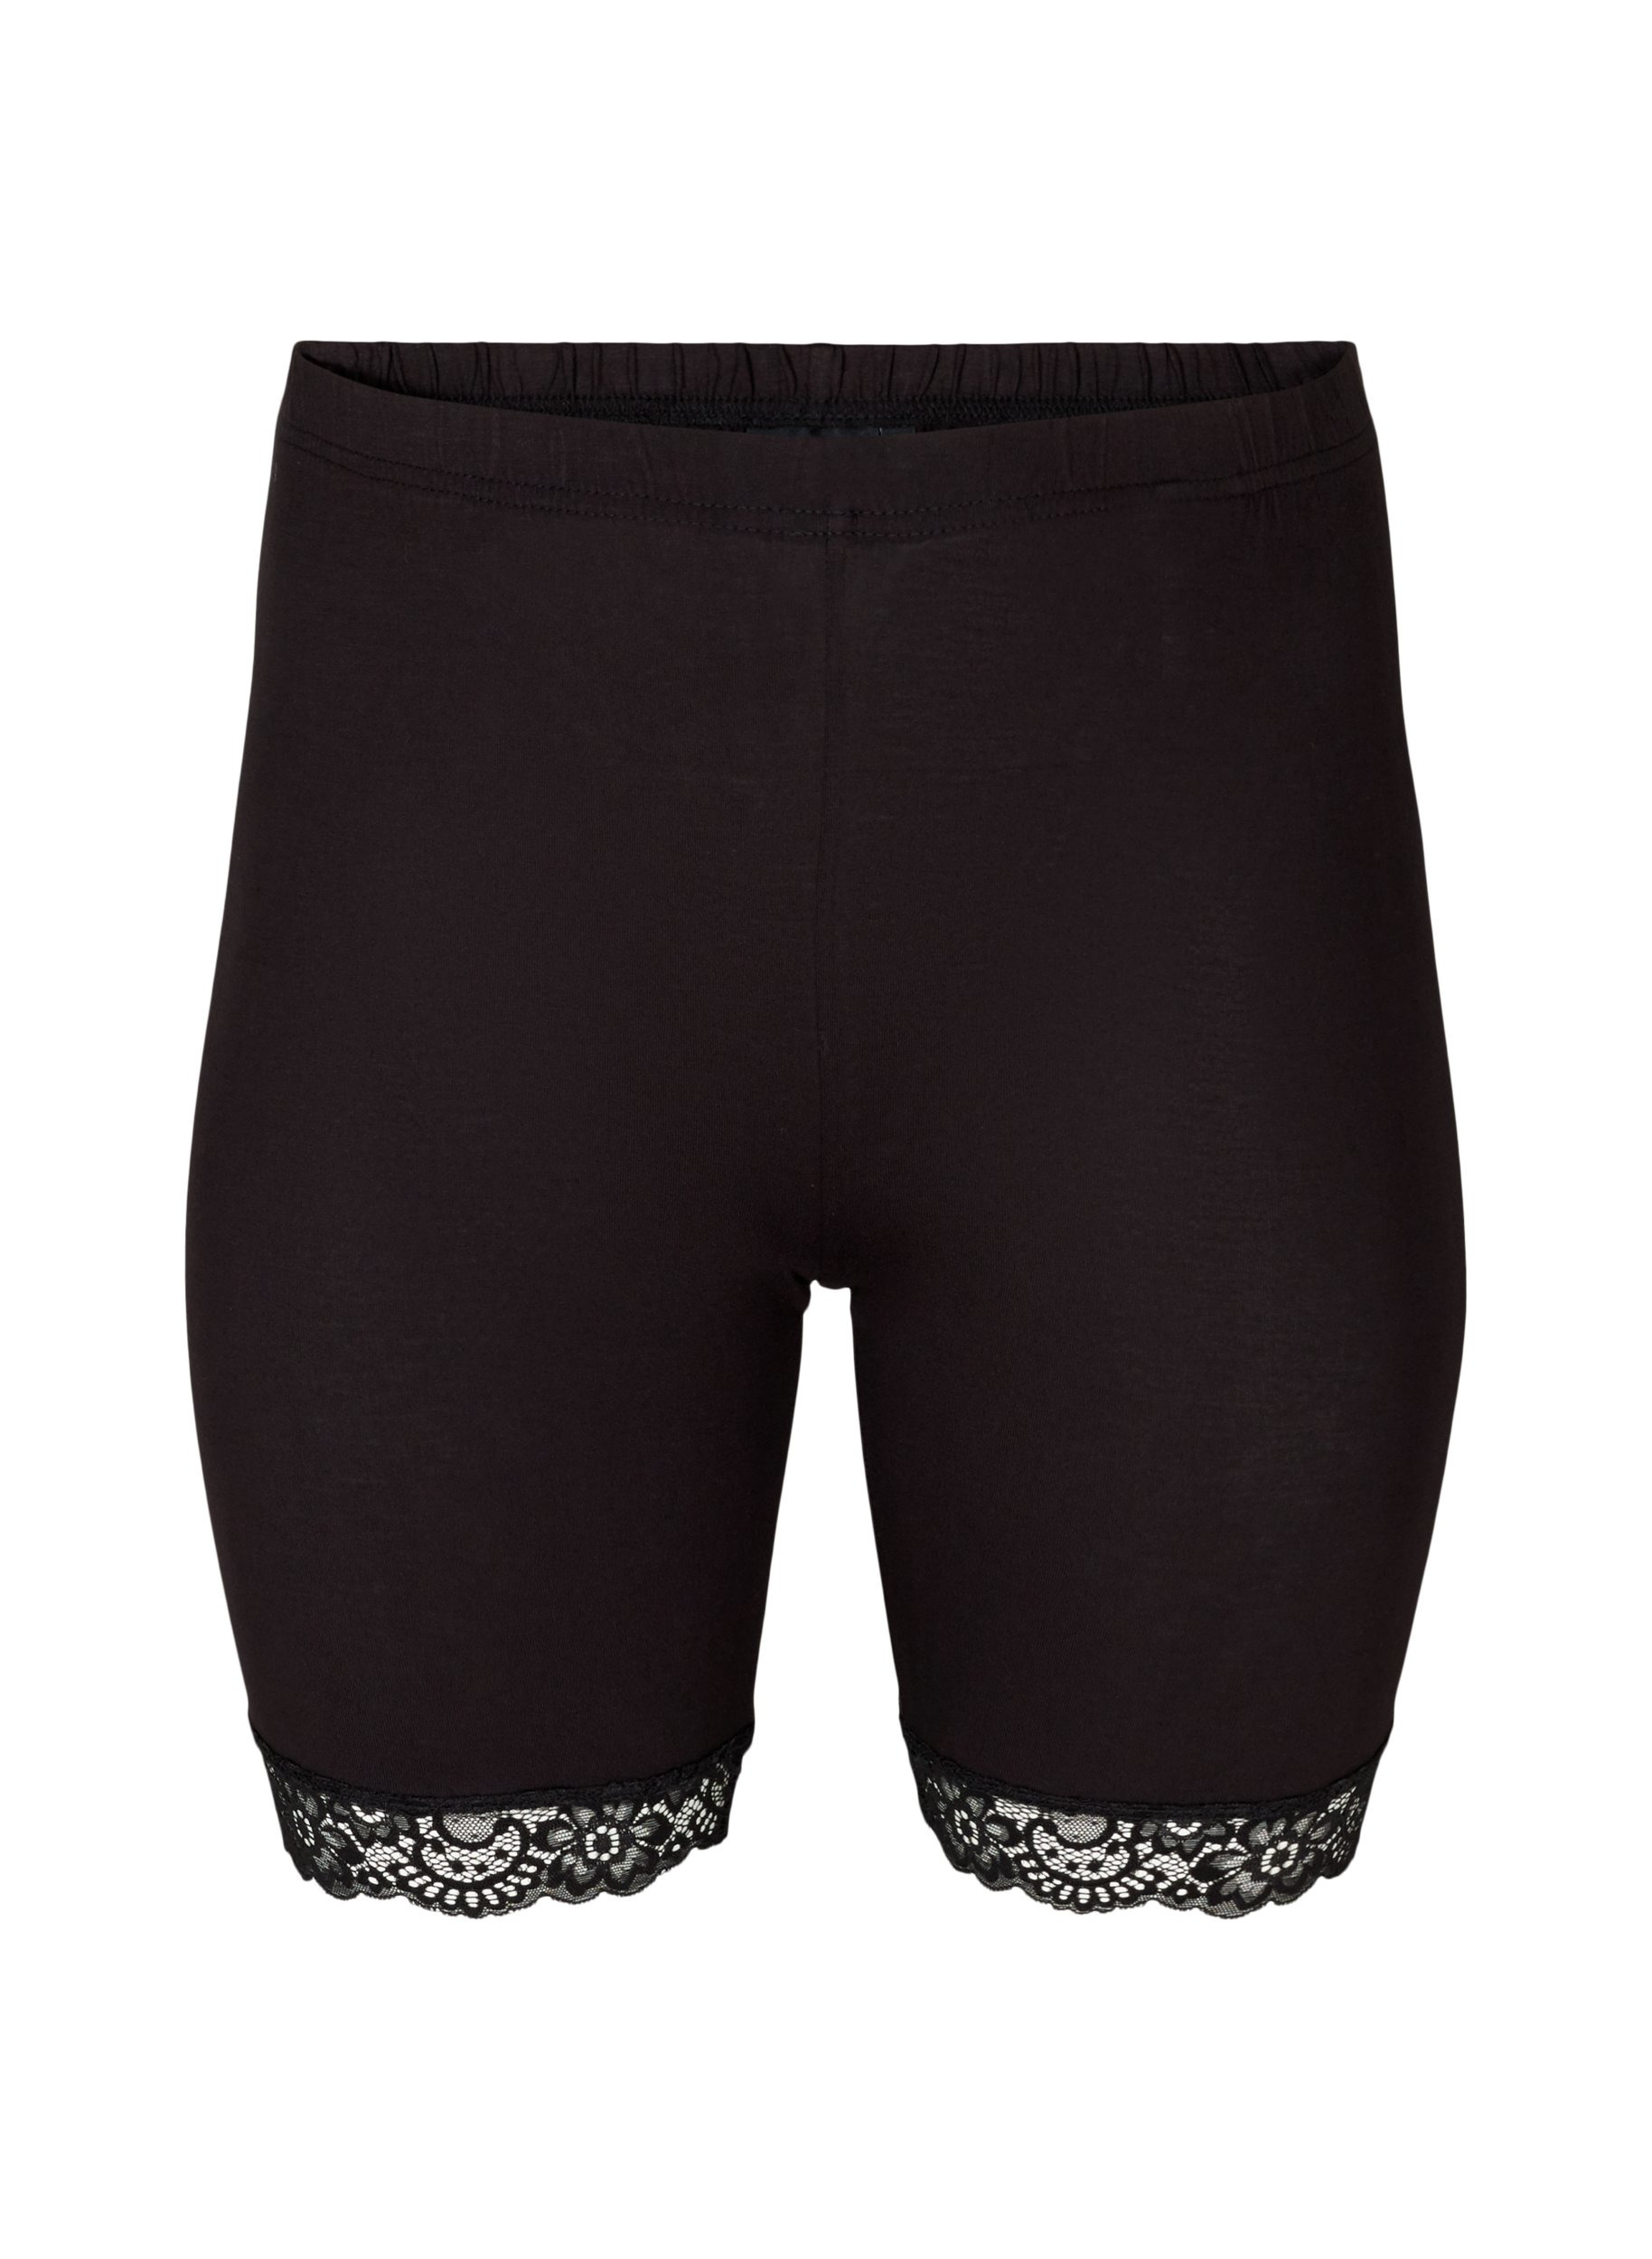 Cycling shorts with a lace trim, Black